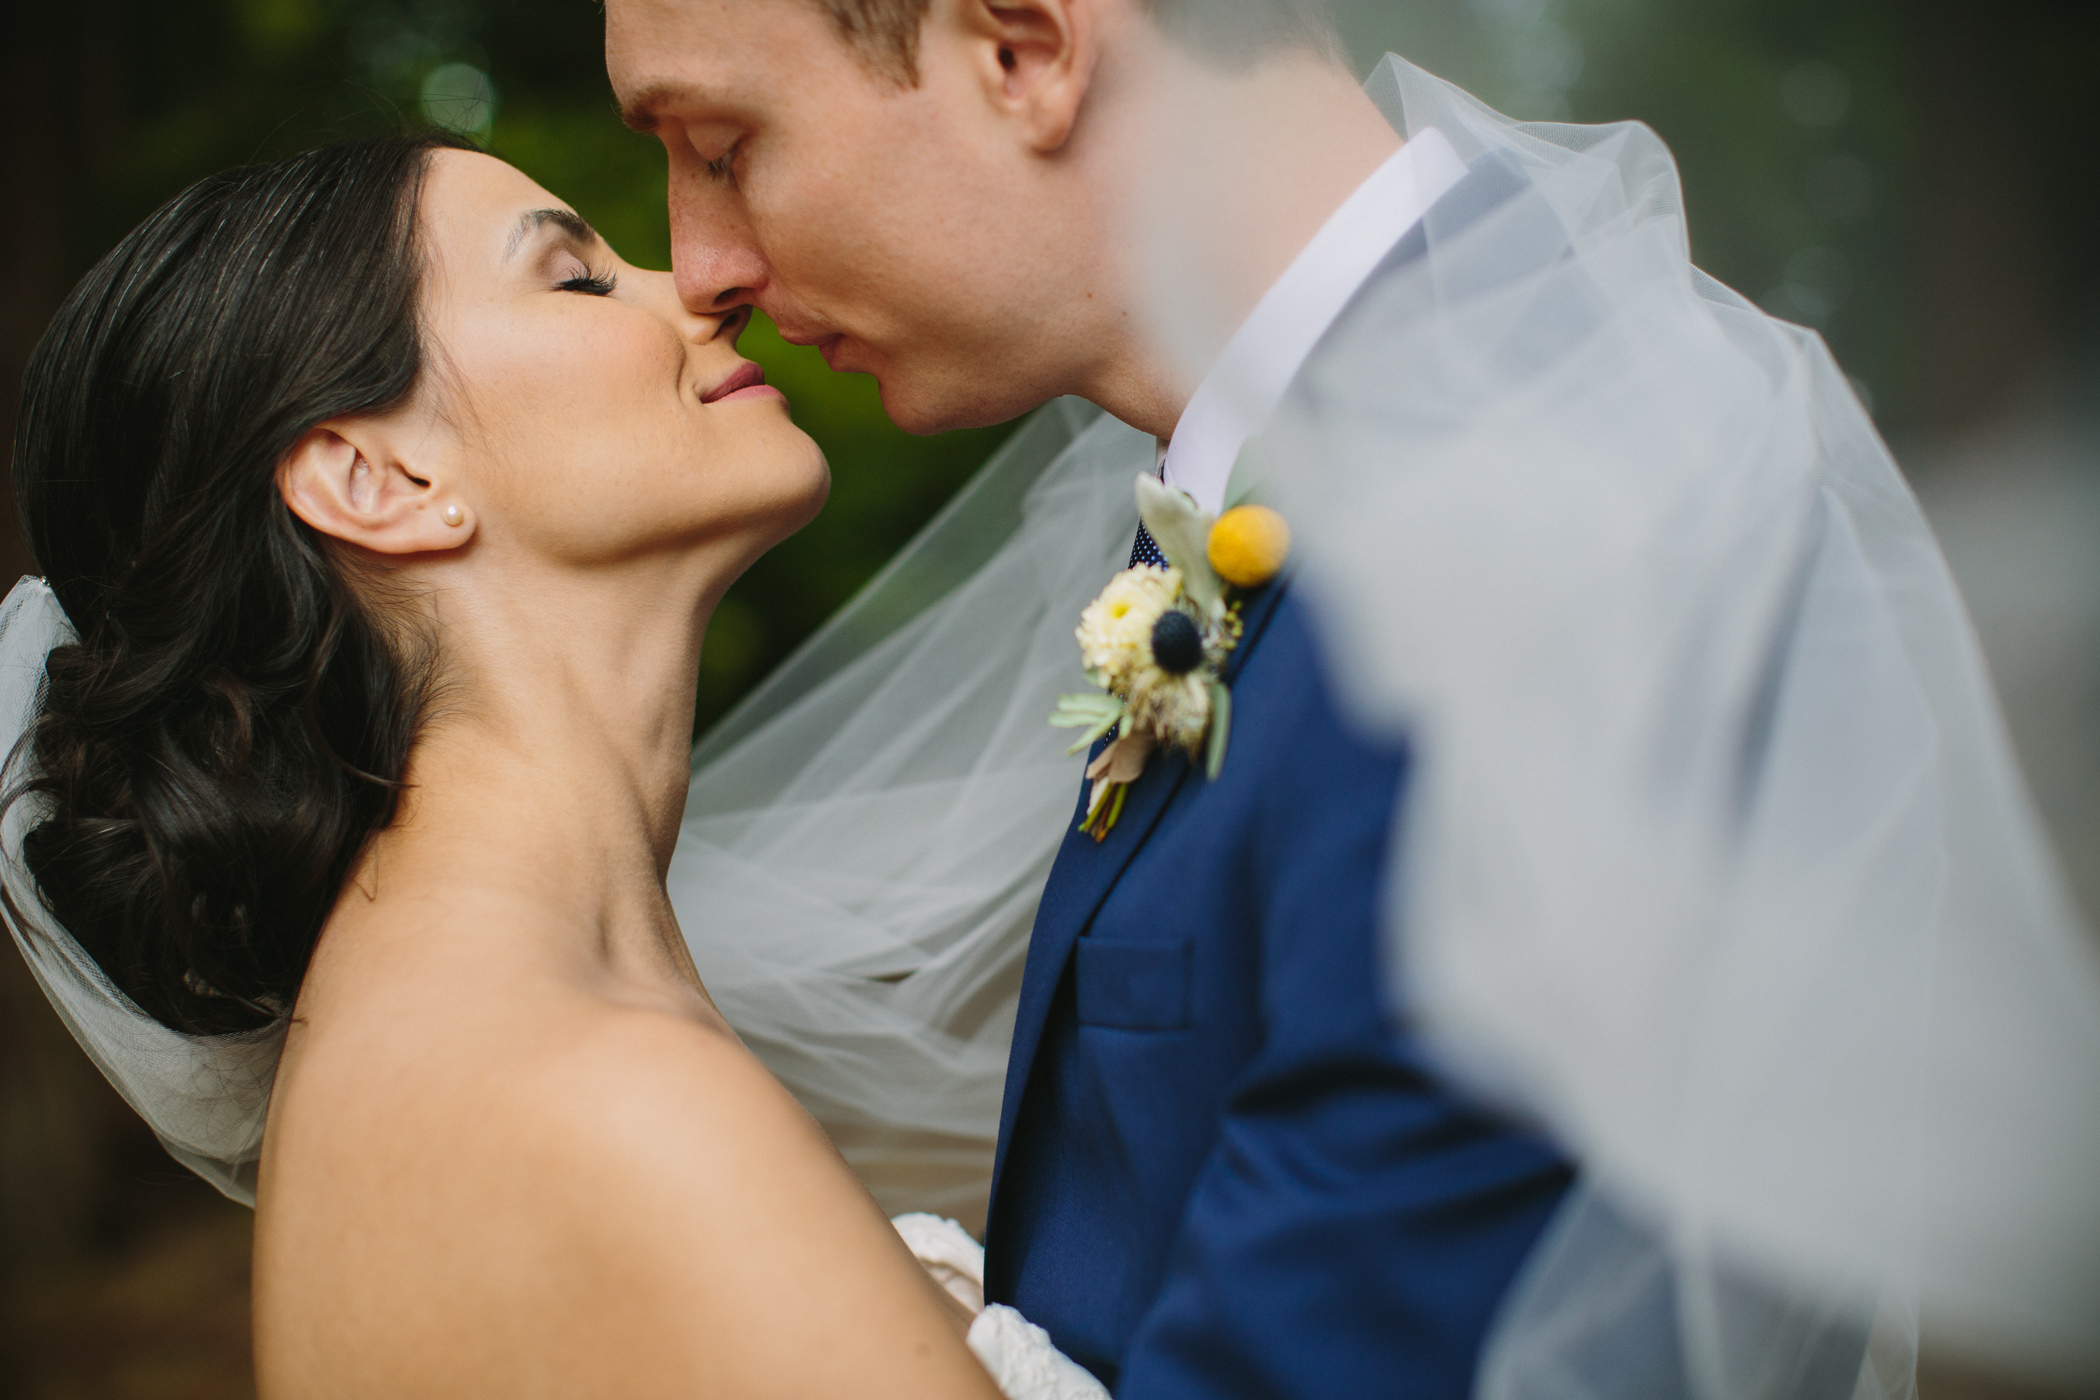 Vancouver bride and groom kiss